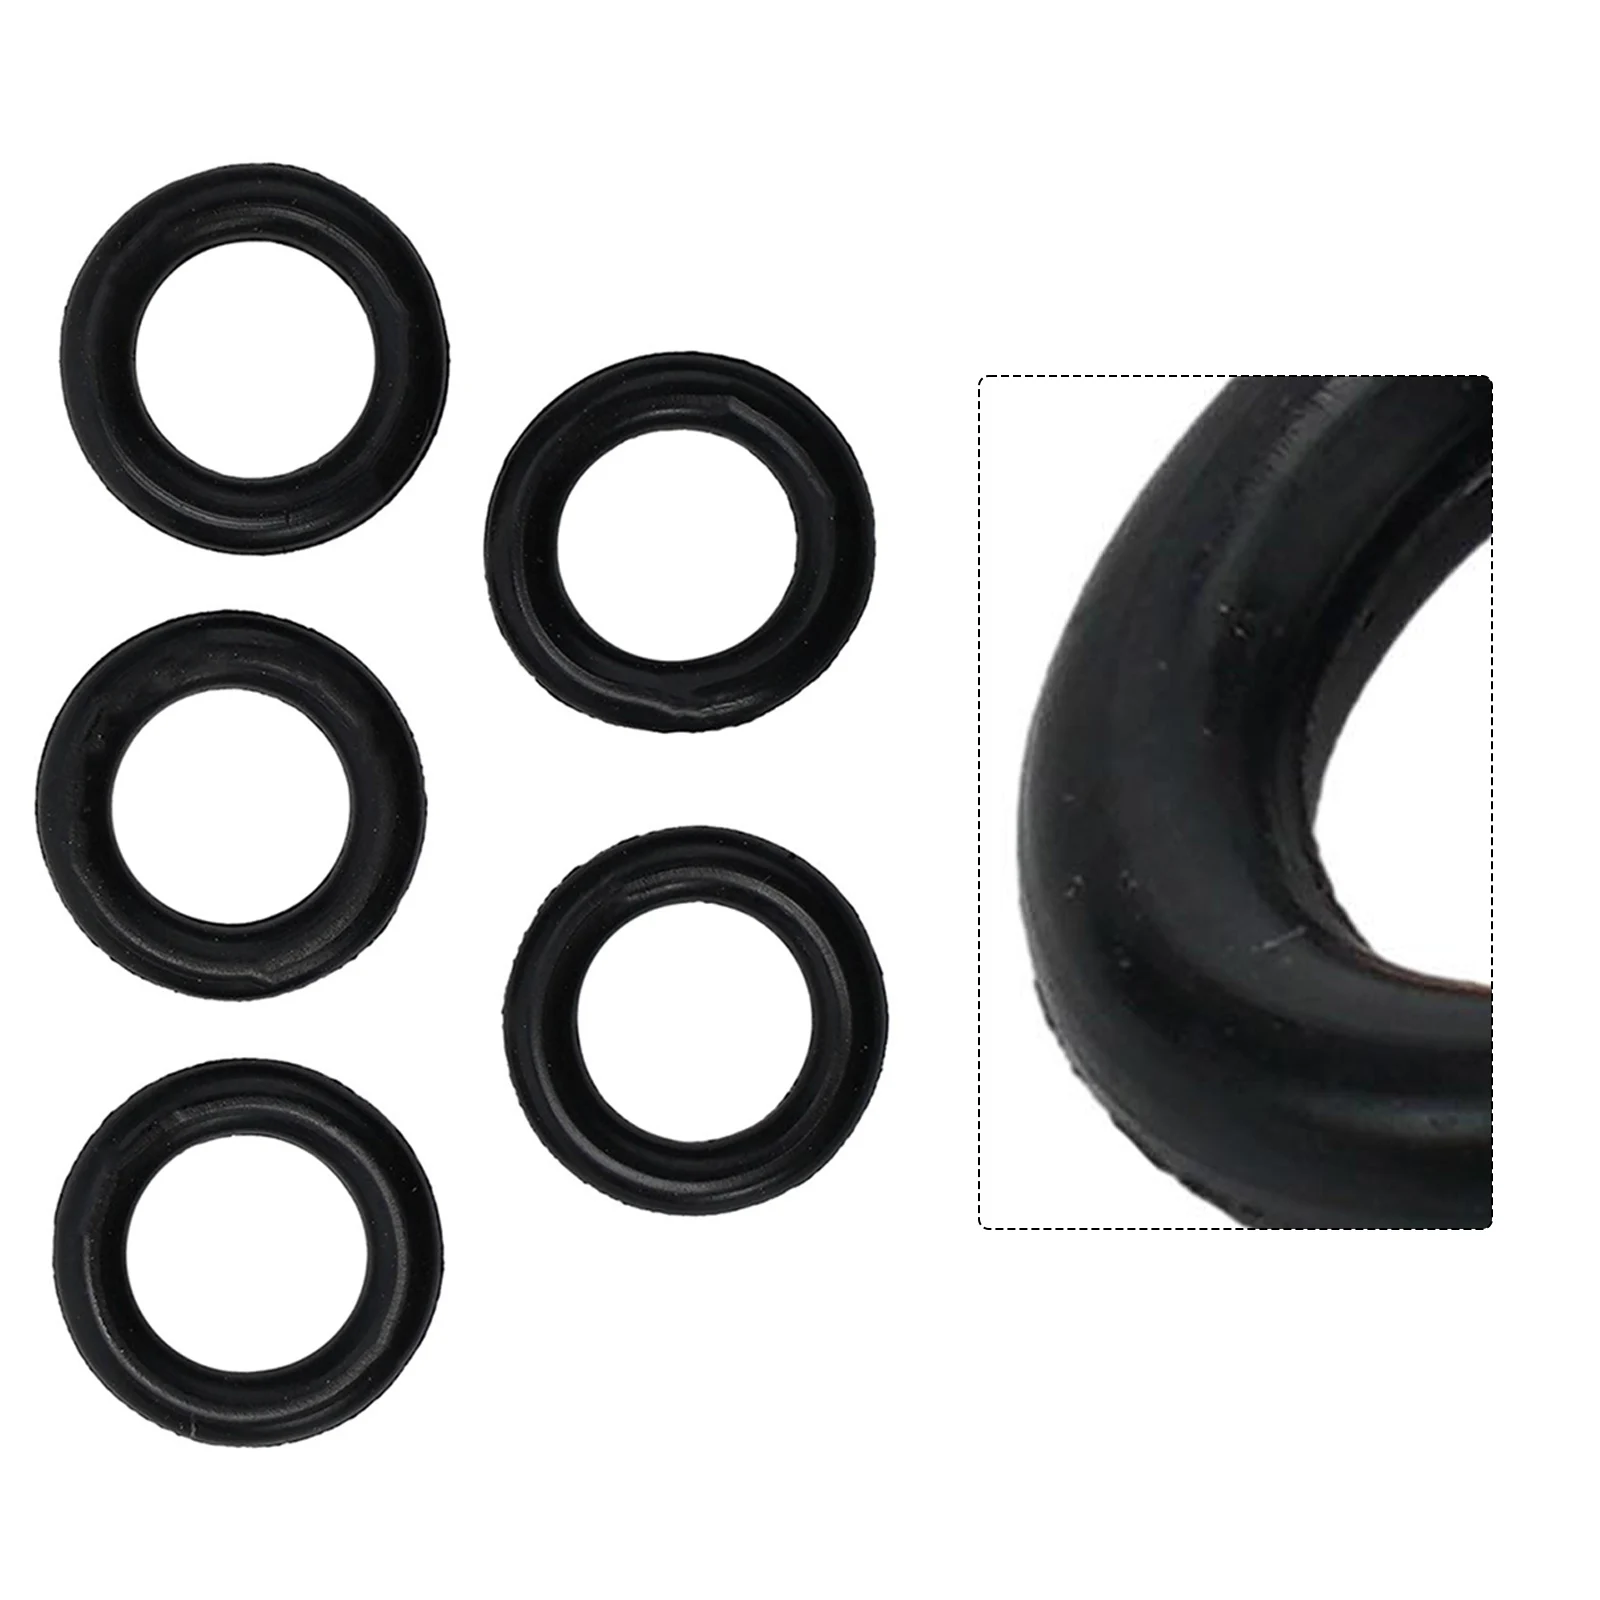 Washer O-Rings Garden Tools Outdoor Power Equipment 5pcs Brand New High Quality Plastic Replacement Convenient